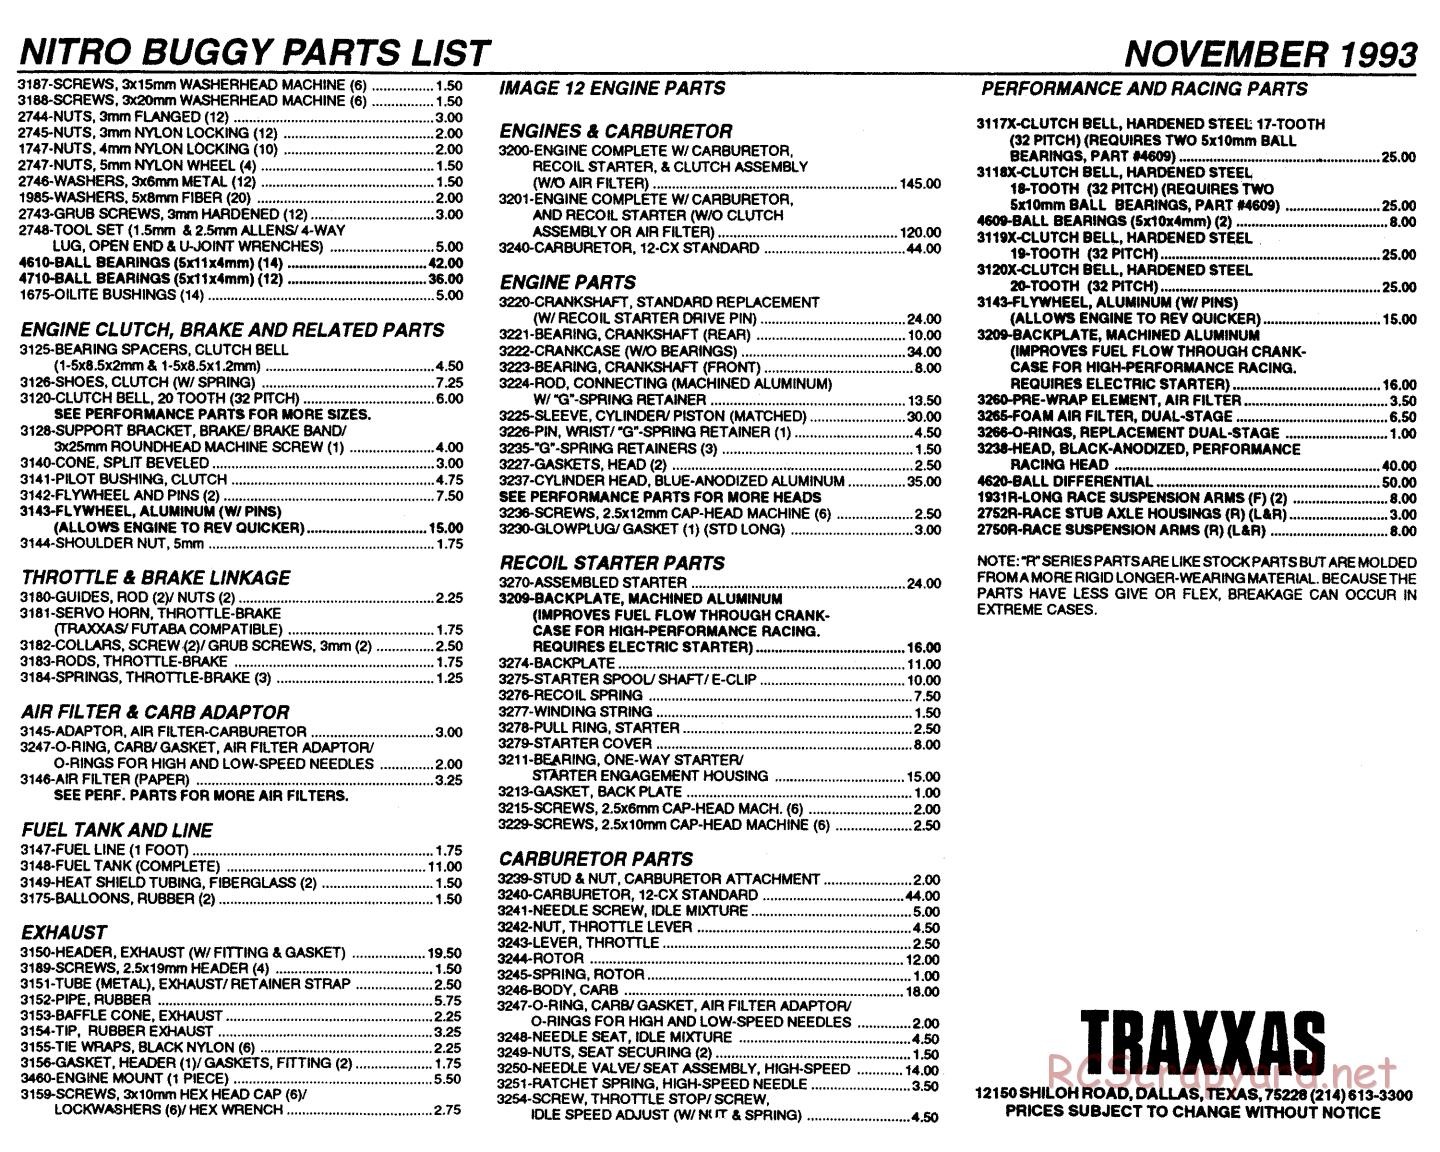 Traxxas - Nitro Buggy (1993) - Parts List - Page 2